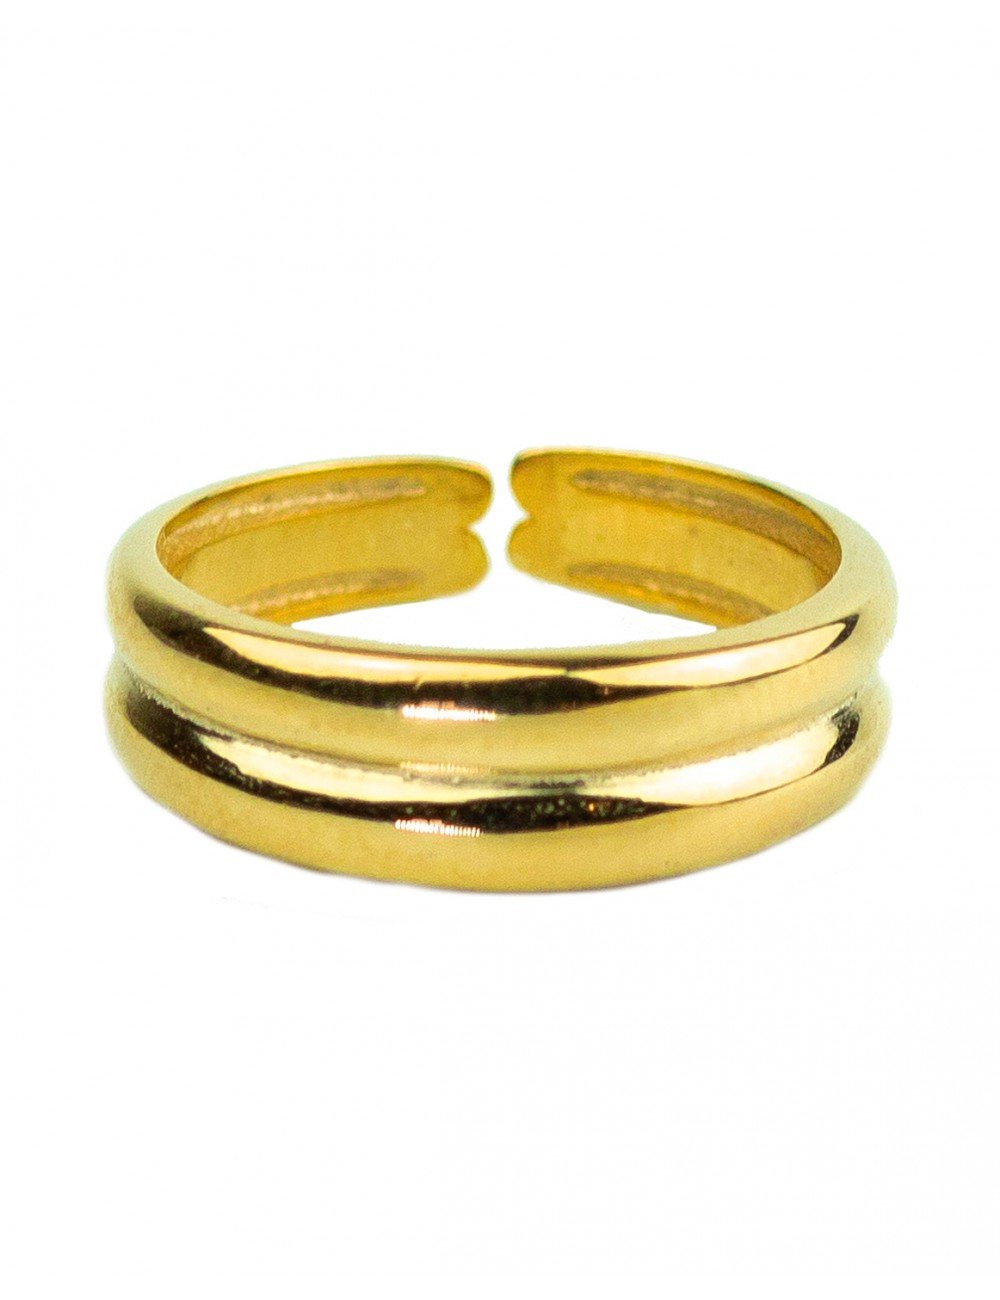 Nomad gold - Gold rings - Trium Jewelry